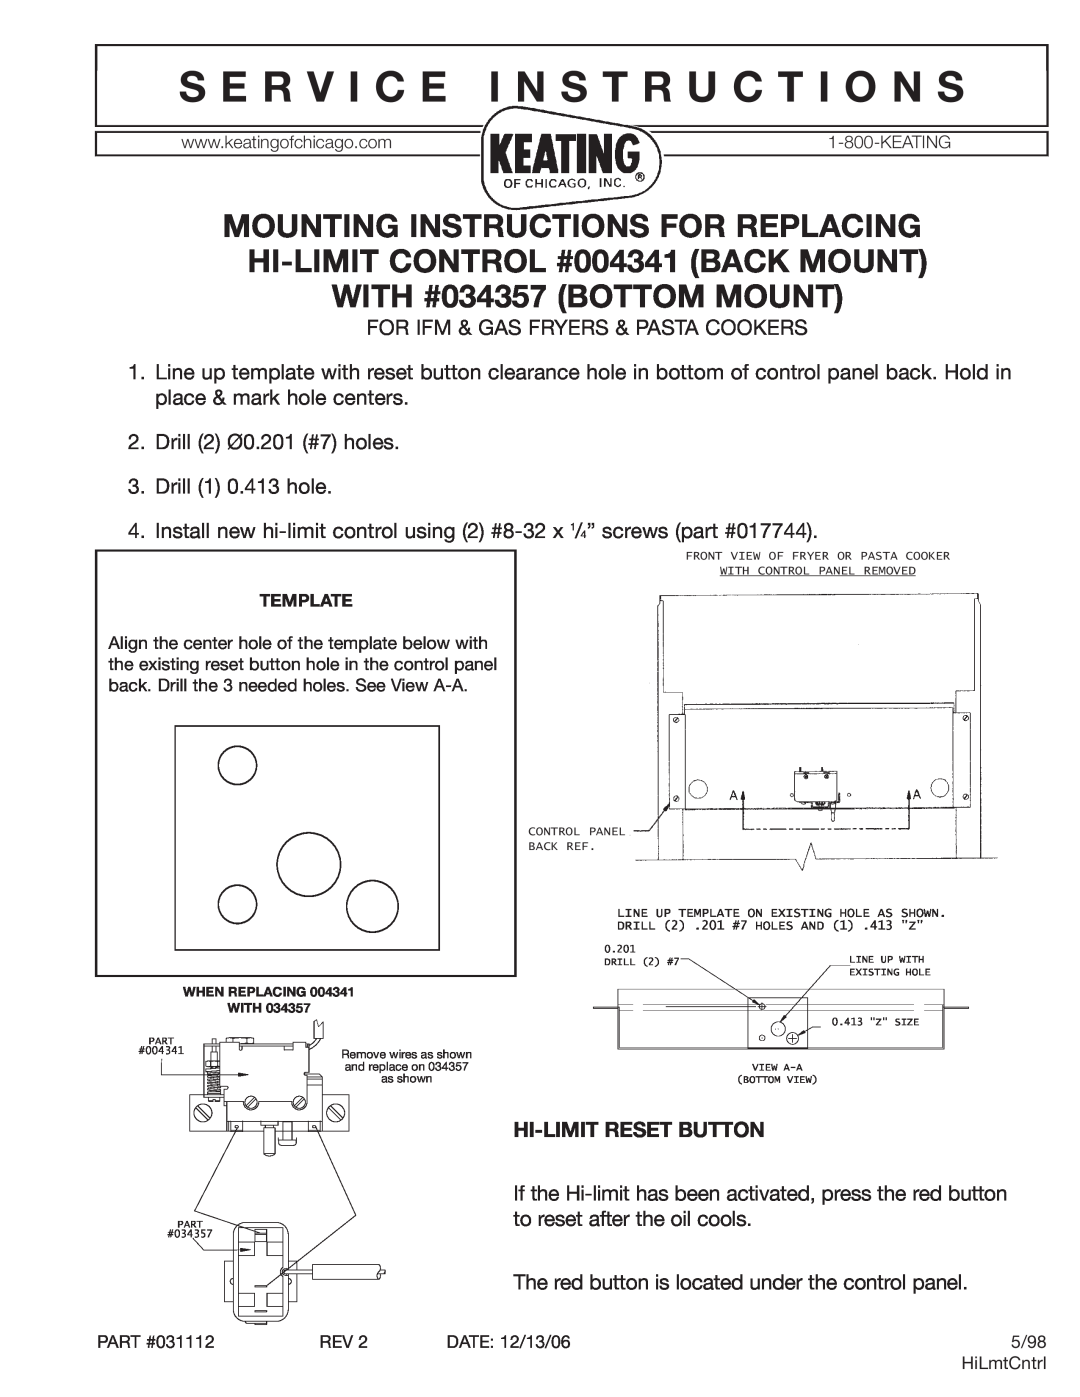 Keating Of Chicago 034357, 004341 manual S E R V I C E I N S T R U C T I O N S, Mounting Instructions For Replacing 